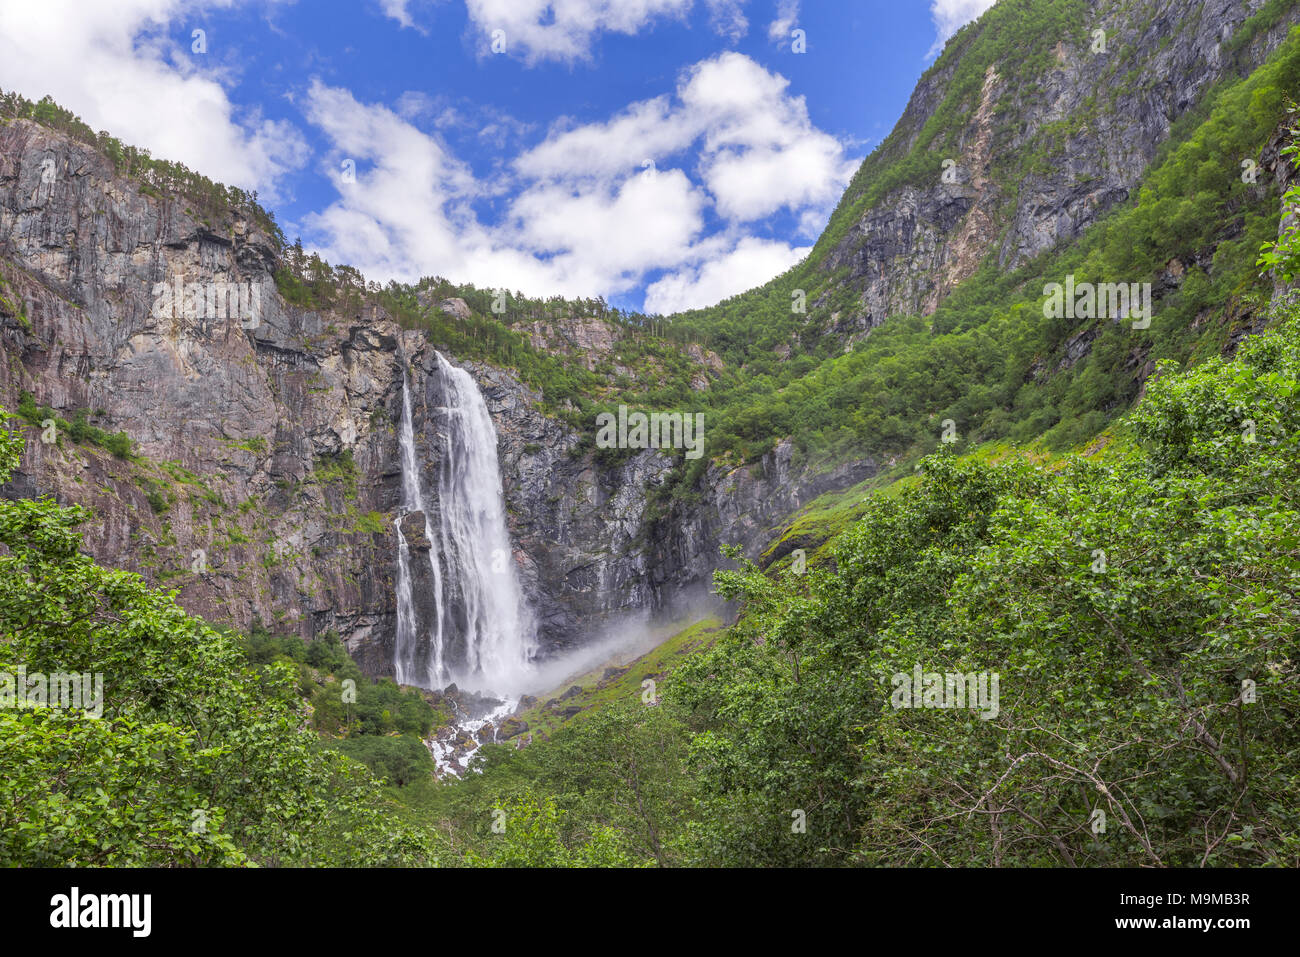 Waterfall Feigumfossen at the Lustrafjorden, Norway, popular site of the Sognefjorden Stock Photo